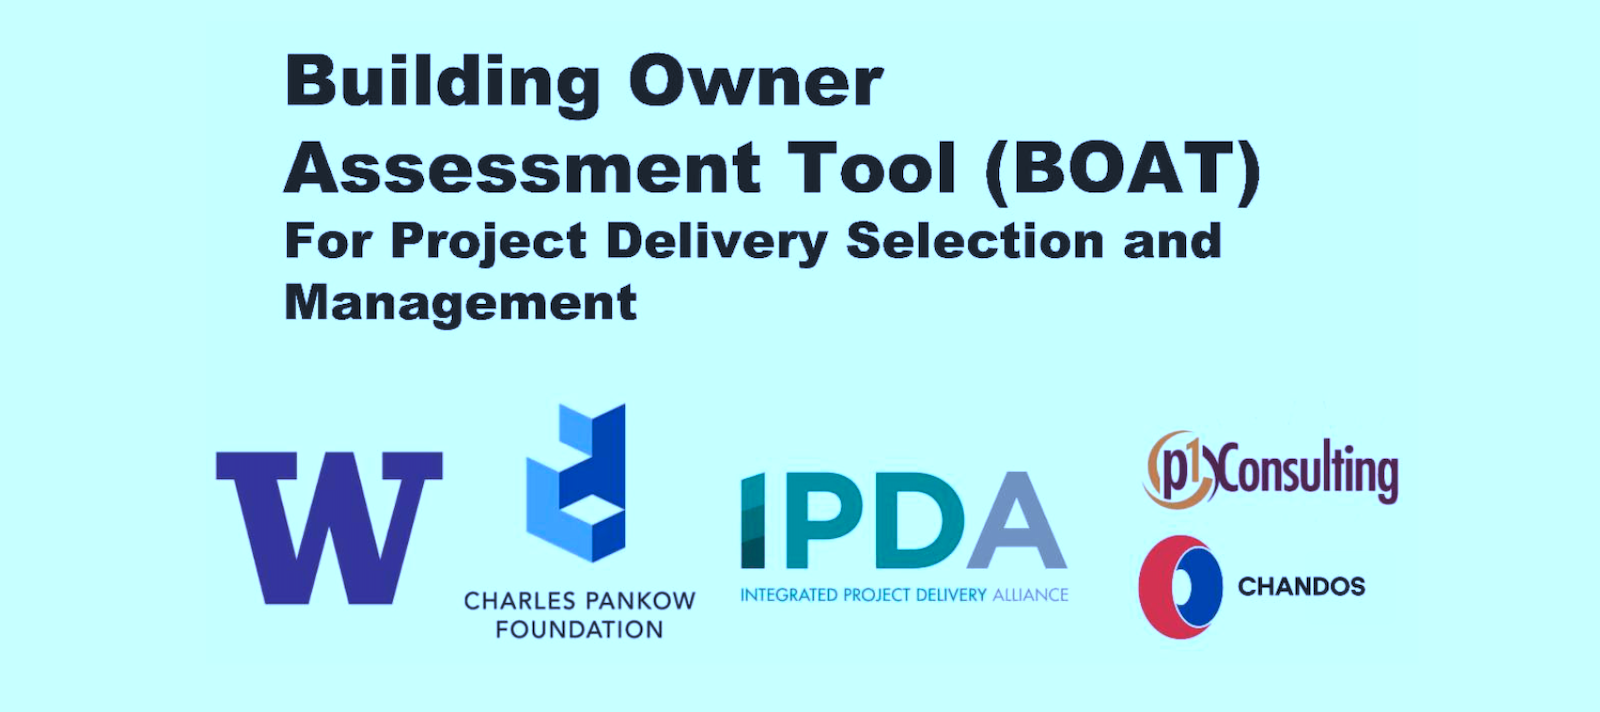 Charles Pankow Foundation releases free project delivery selection tool for building owners, developers, and project teams